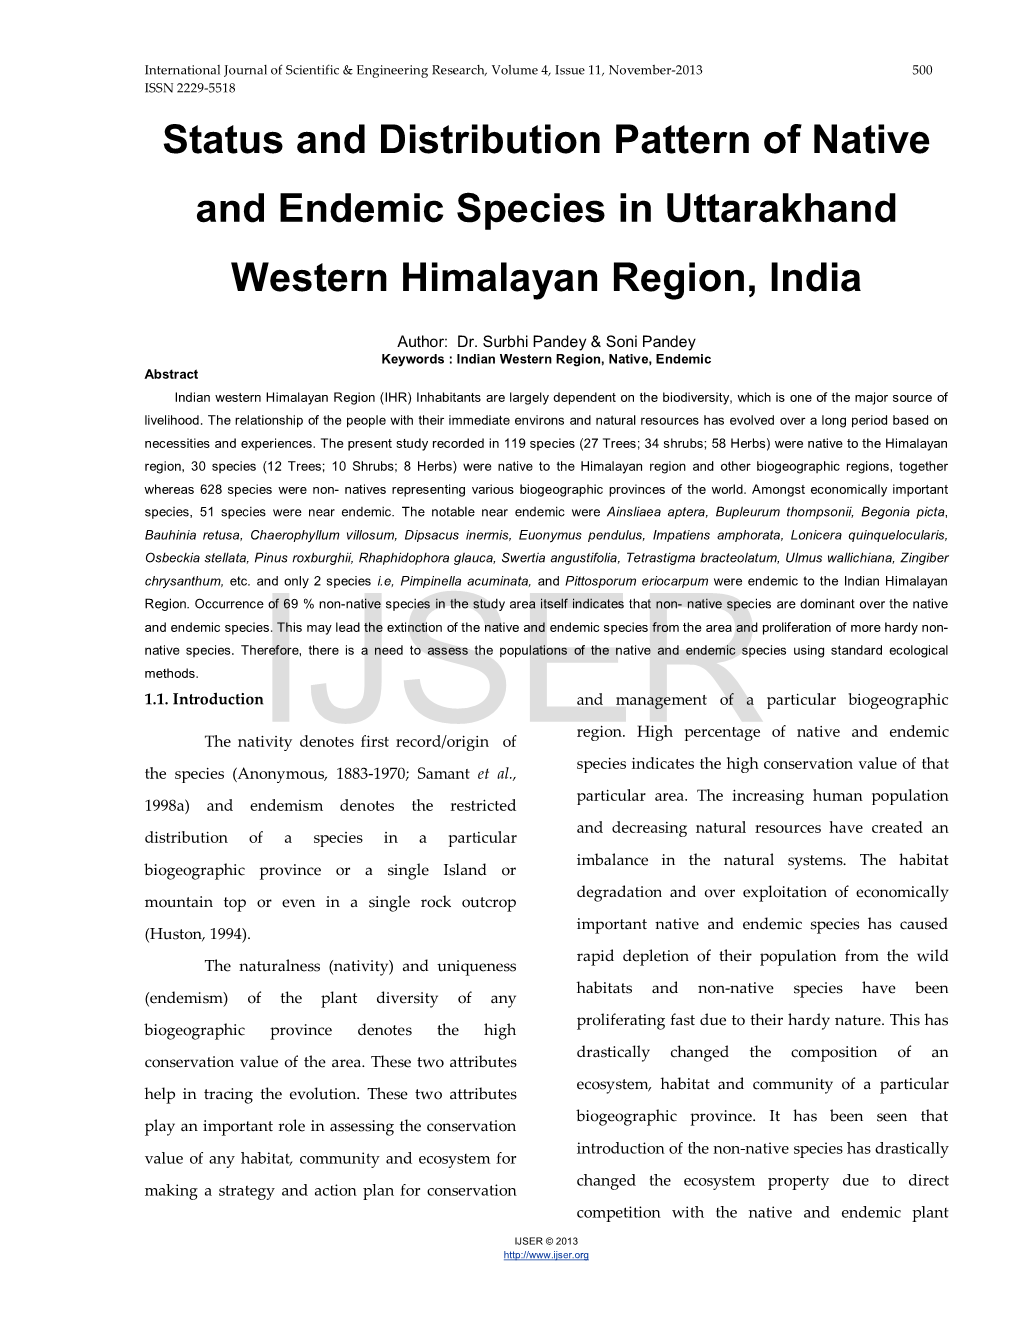 Status and Distribution Pattern of Native and Endemic Species in Uttarakhand